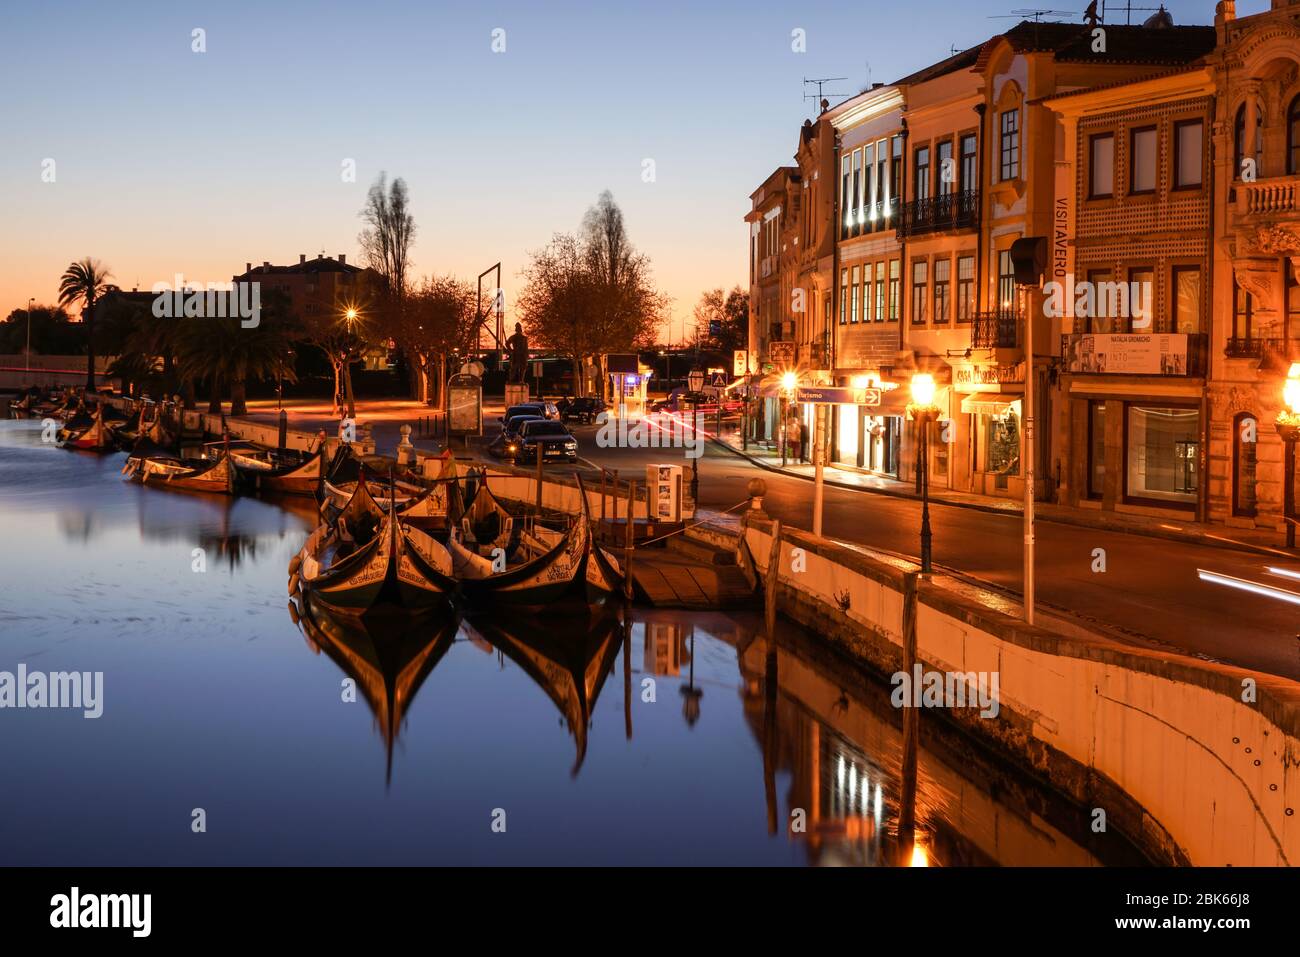 Aveiro, Portugal - April 2019: Tradicional Moliceiro boats docked in the main canal near Rossio after sunset. Stock Photo